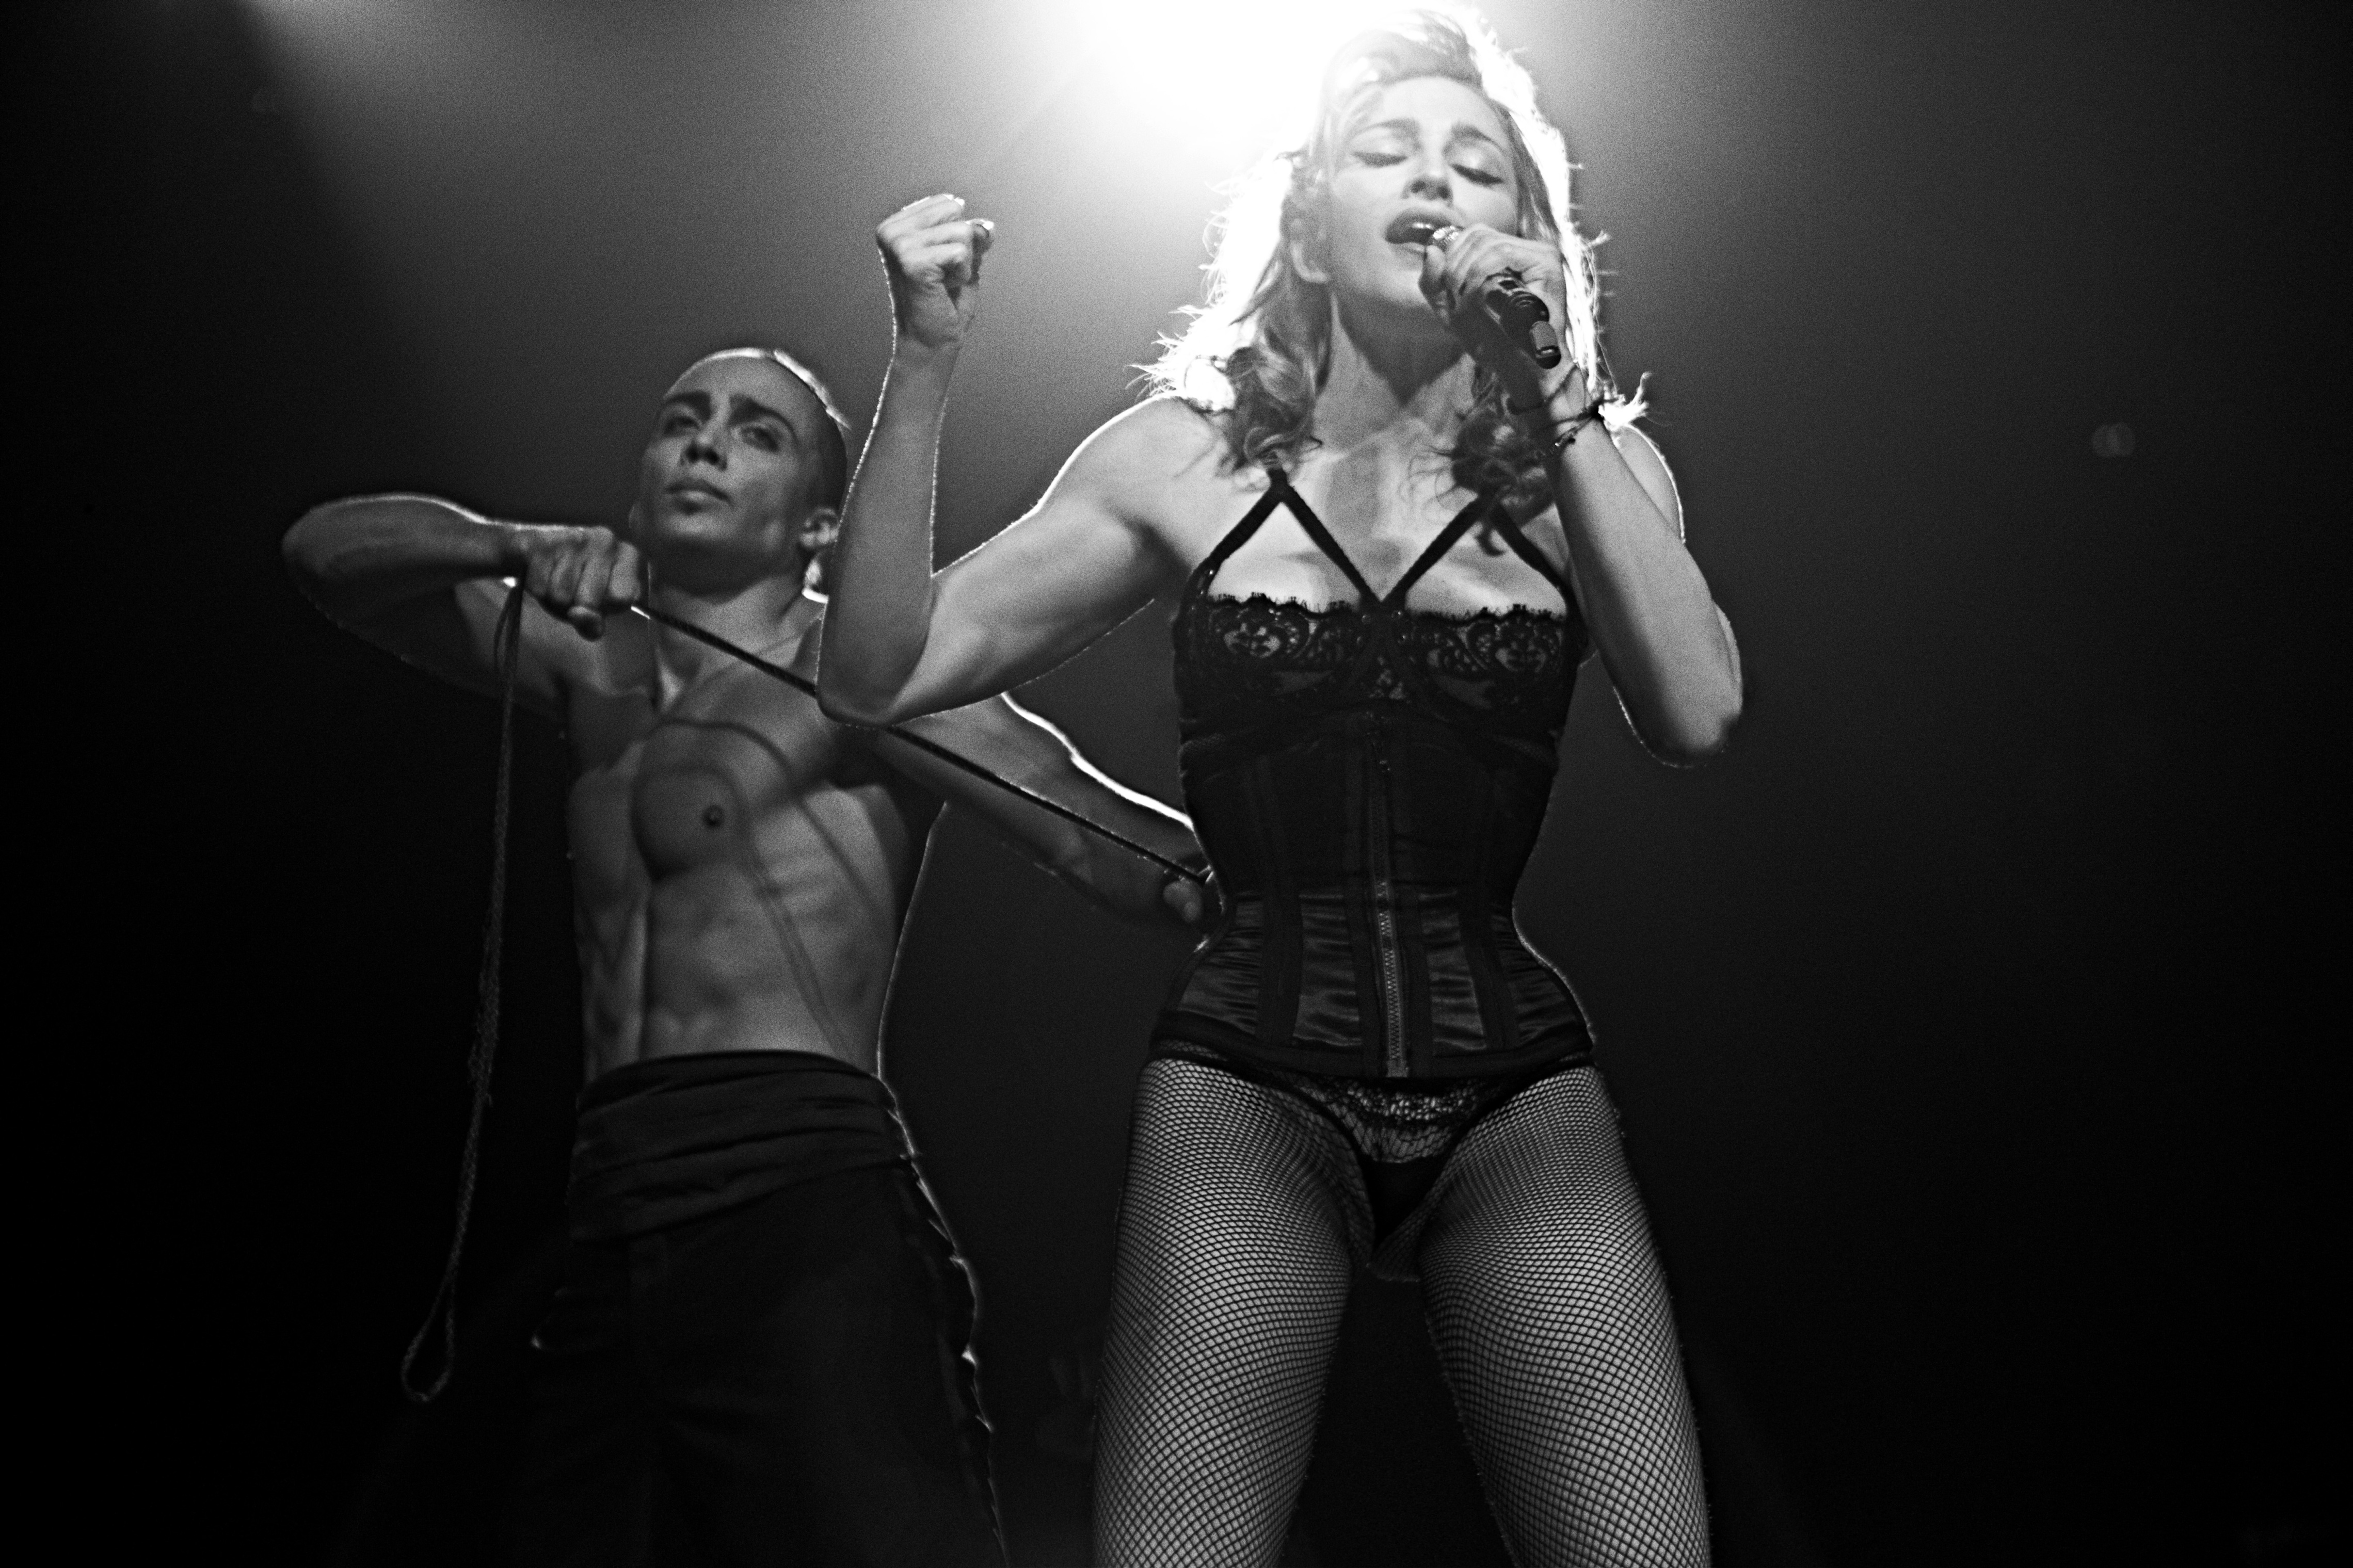 20130717-pictures-madonna-mdna-tour-dvd-